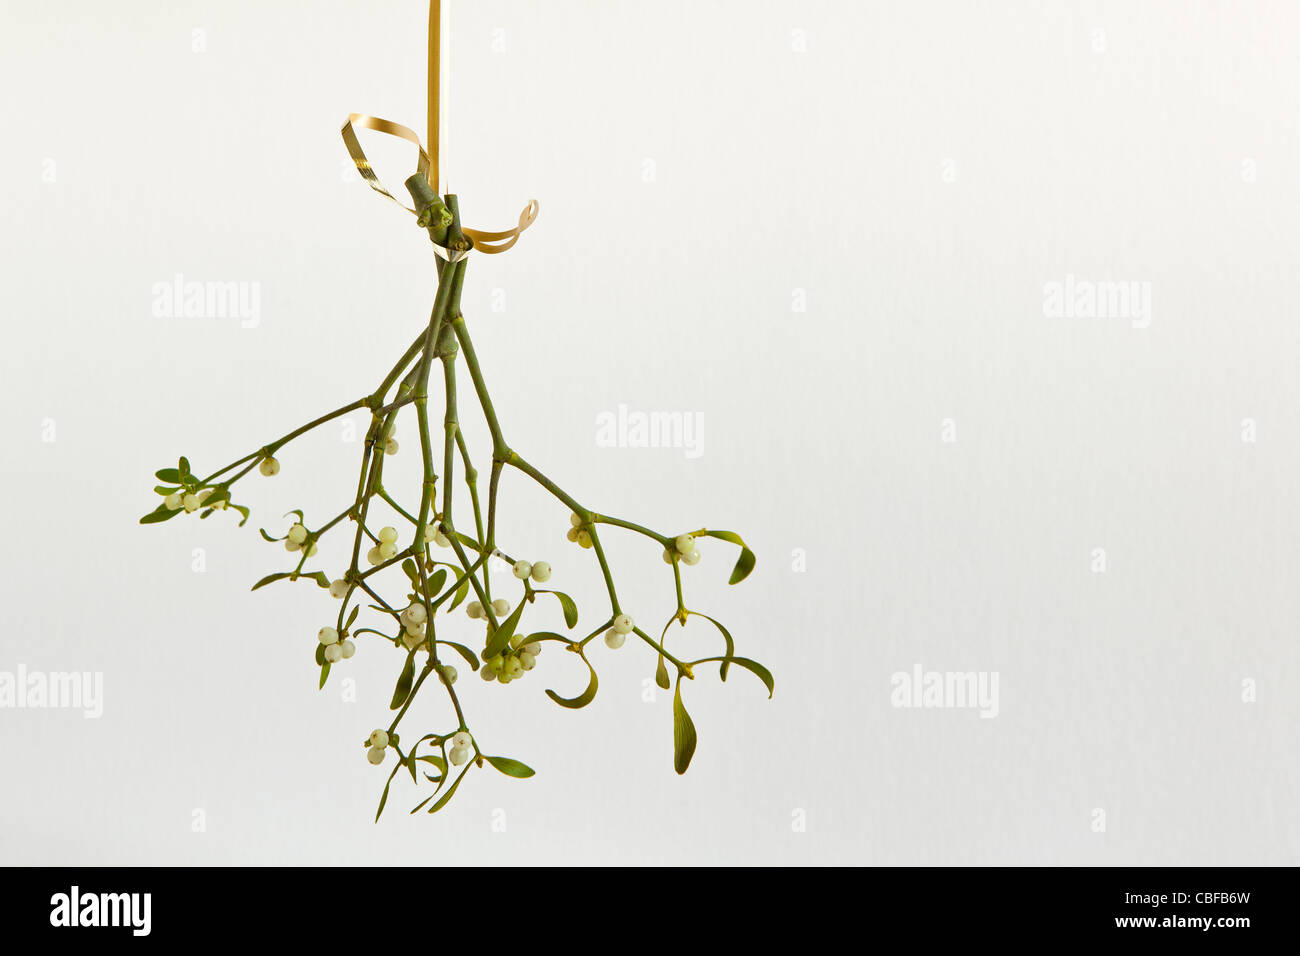 A bunch of mistletoe hanging by a golden ribbon against a white background. Stock Photo